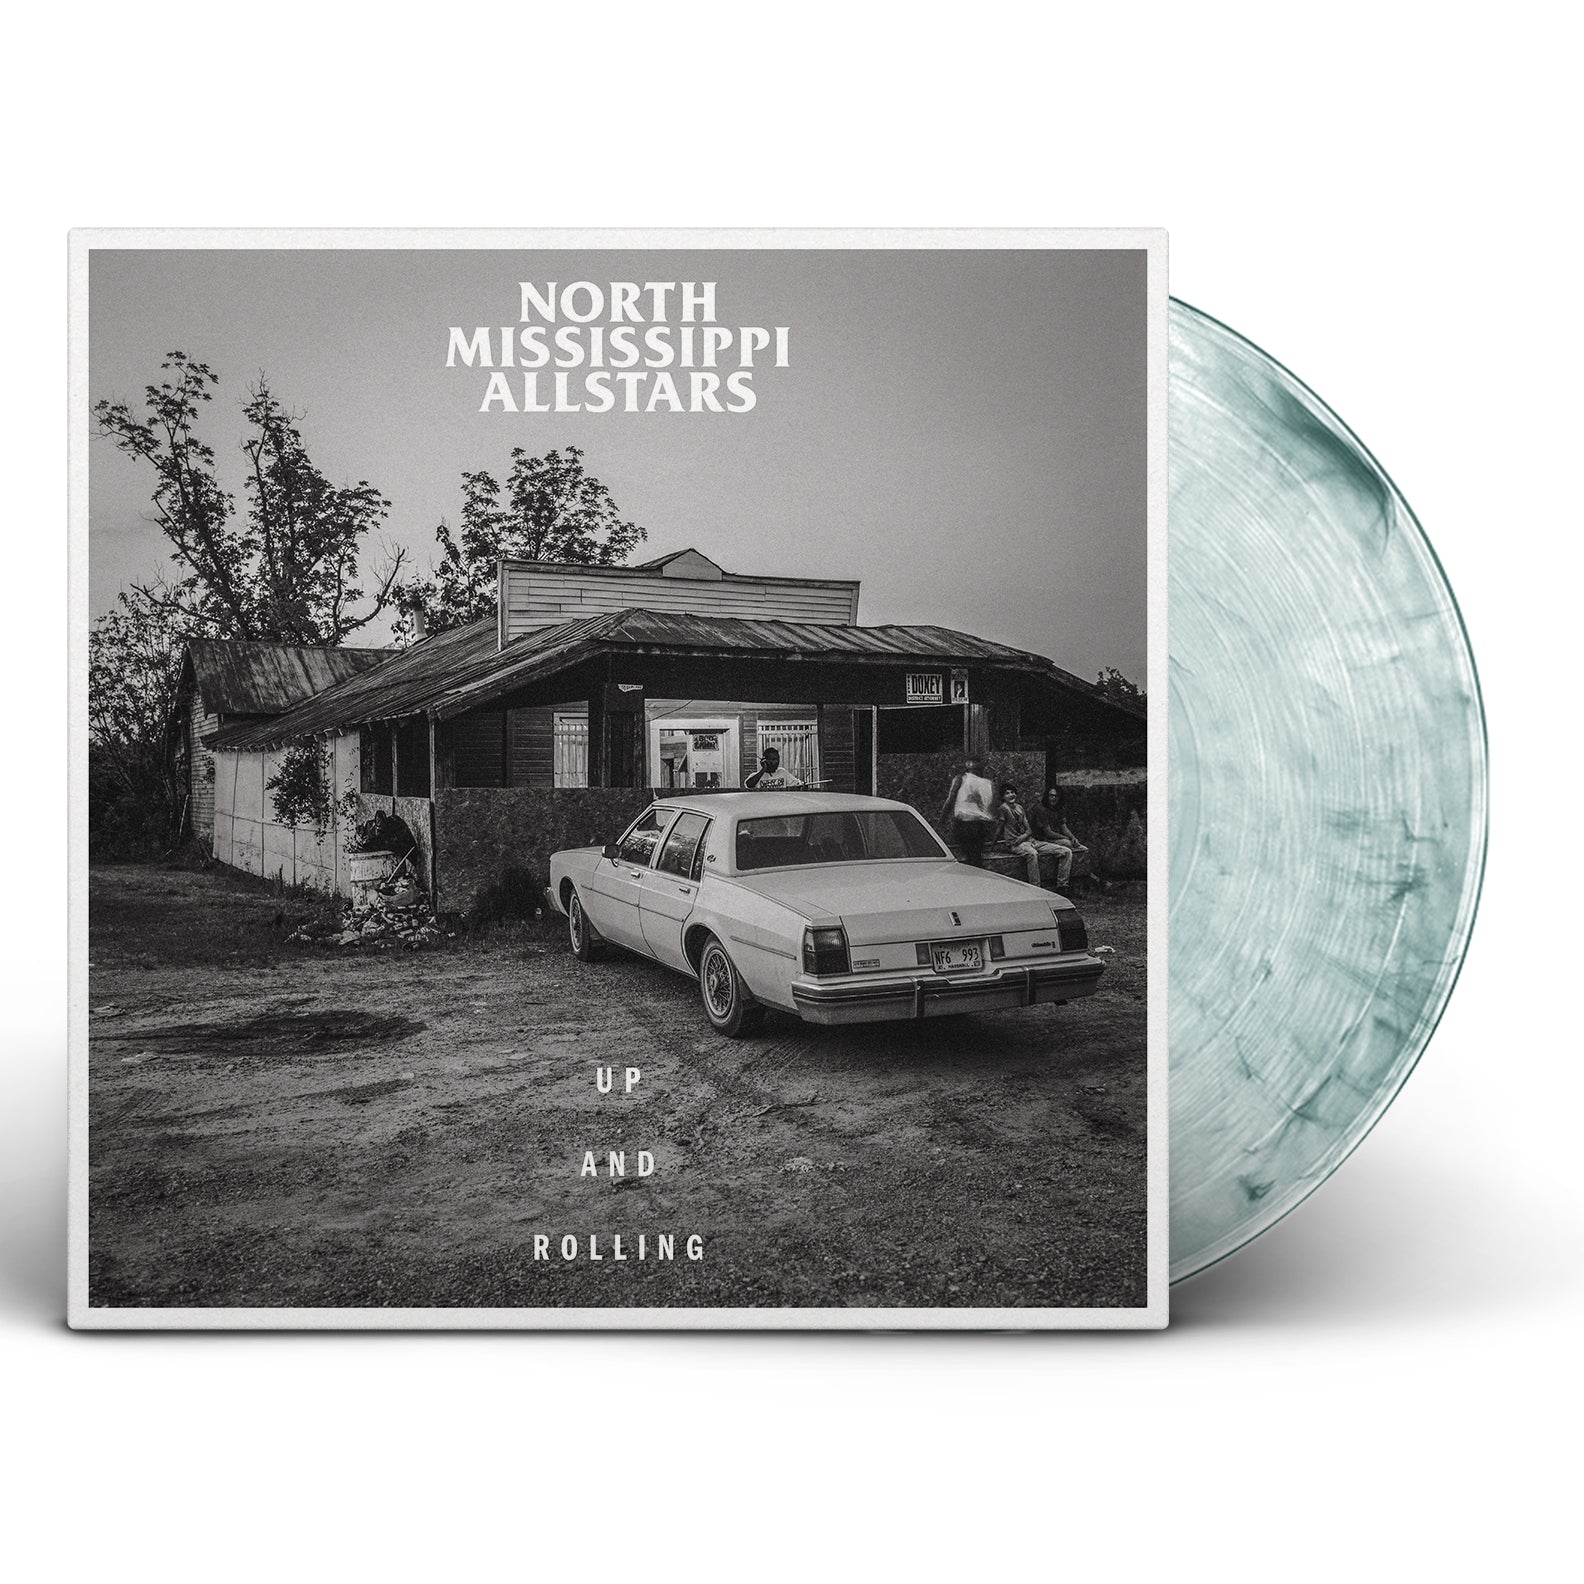 North Mississippi Allstars - Up And Rolling [Black Friday Exclusive Color Vinyl]